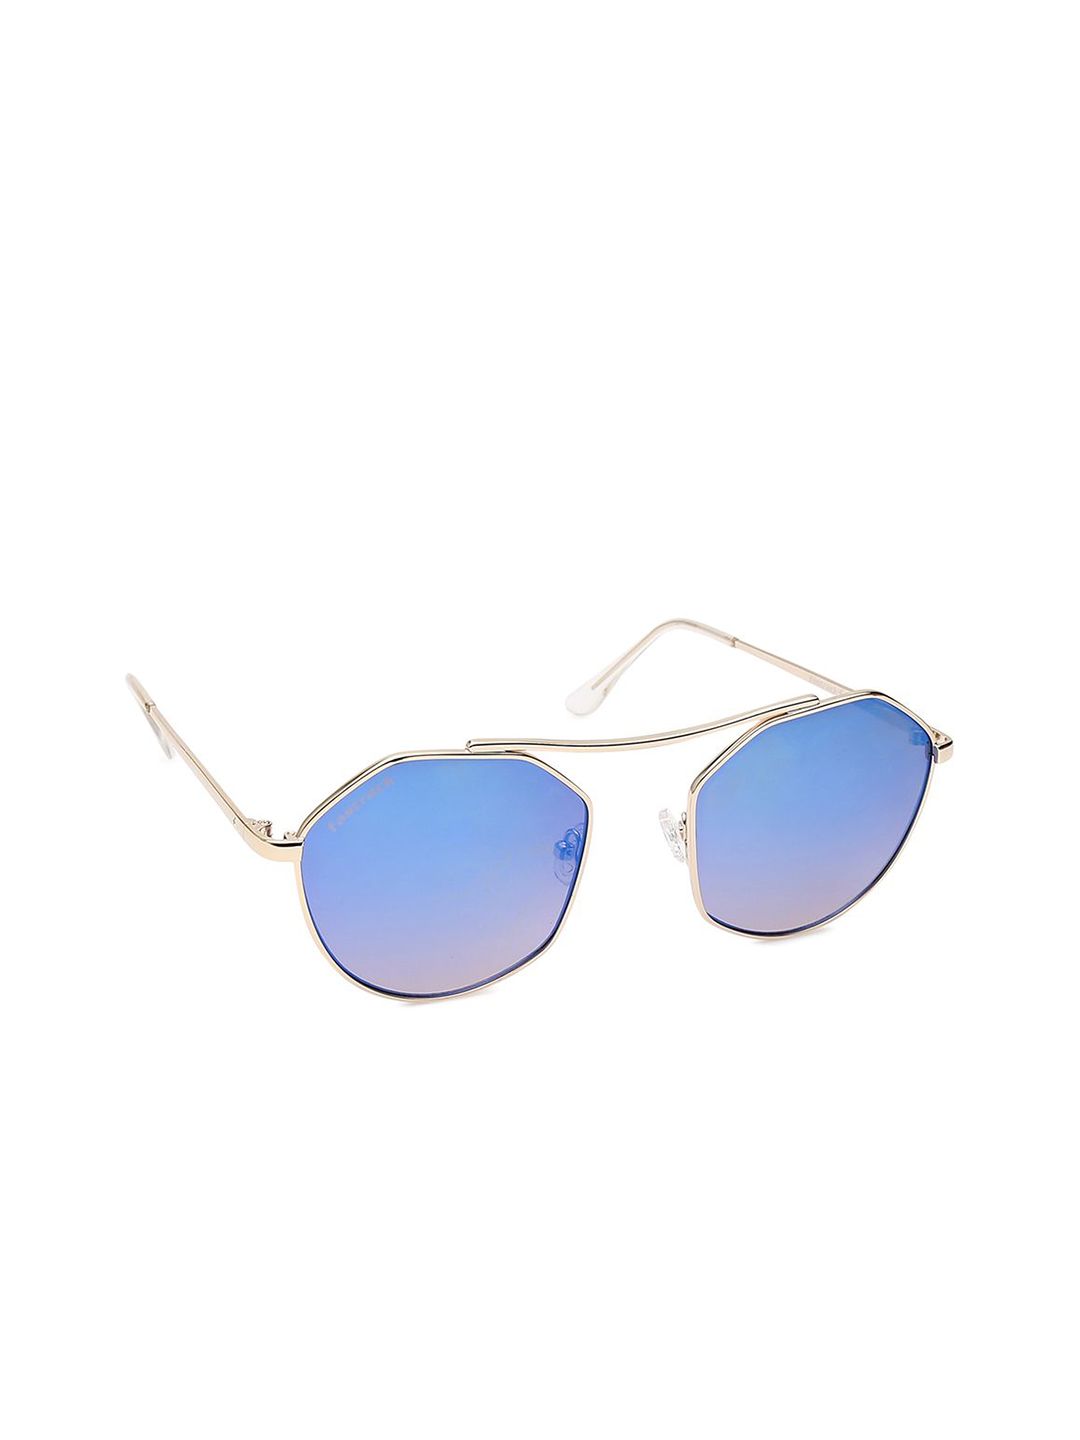 Fastrack Unisex Blue Lens & Gold-Toned Oval Sunglasses with UV Protected Lens Price in India